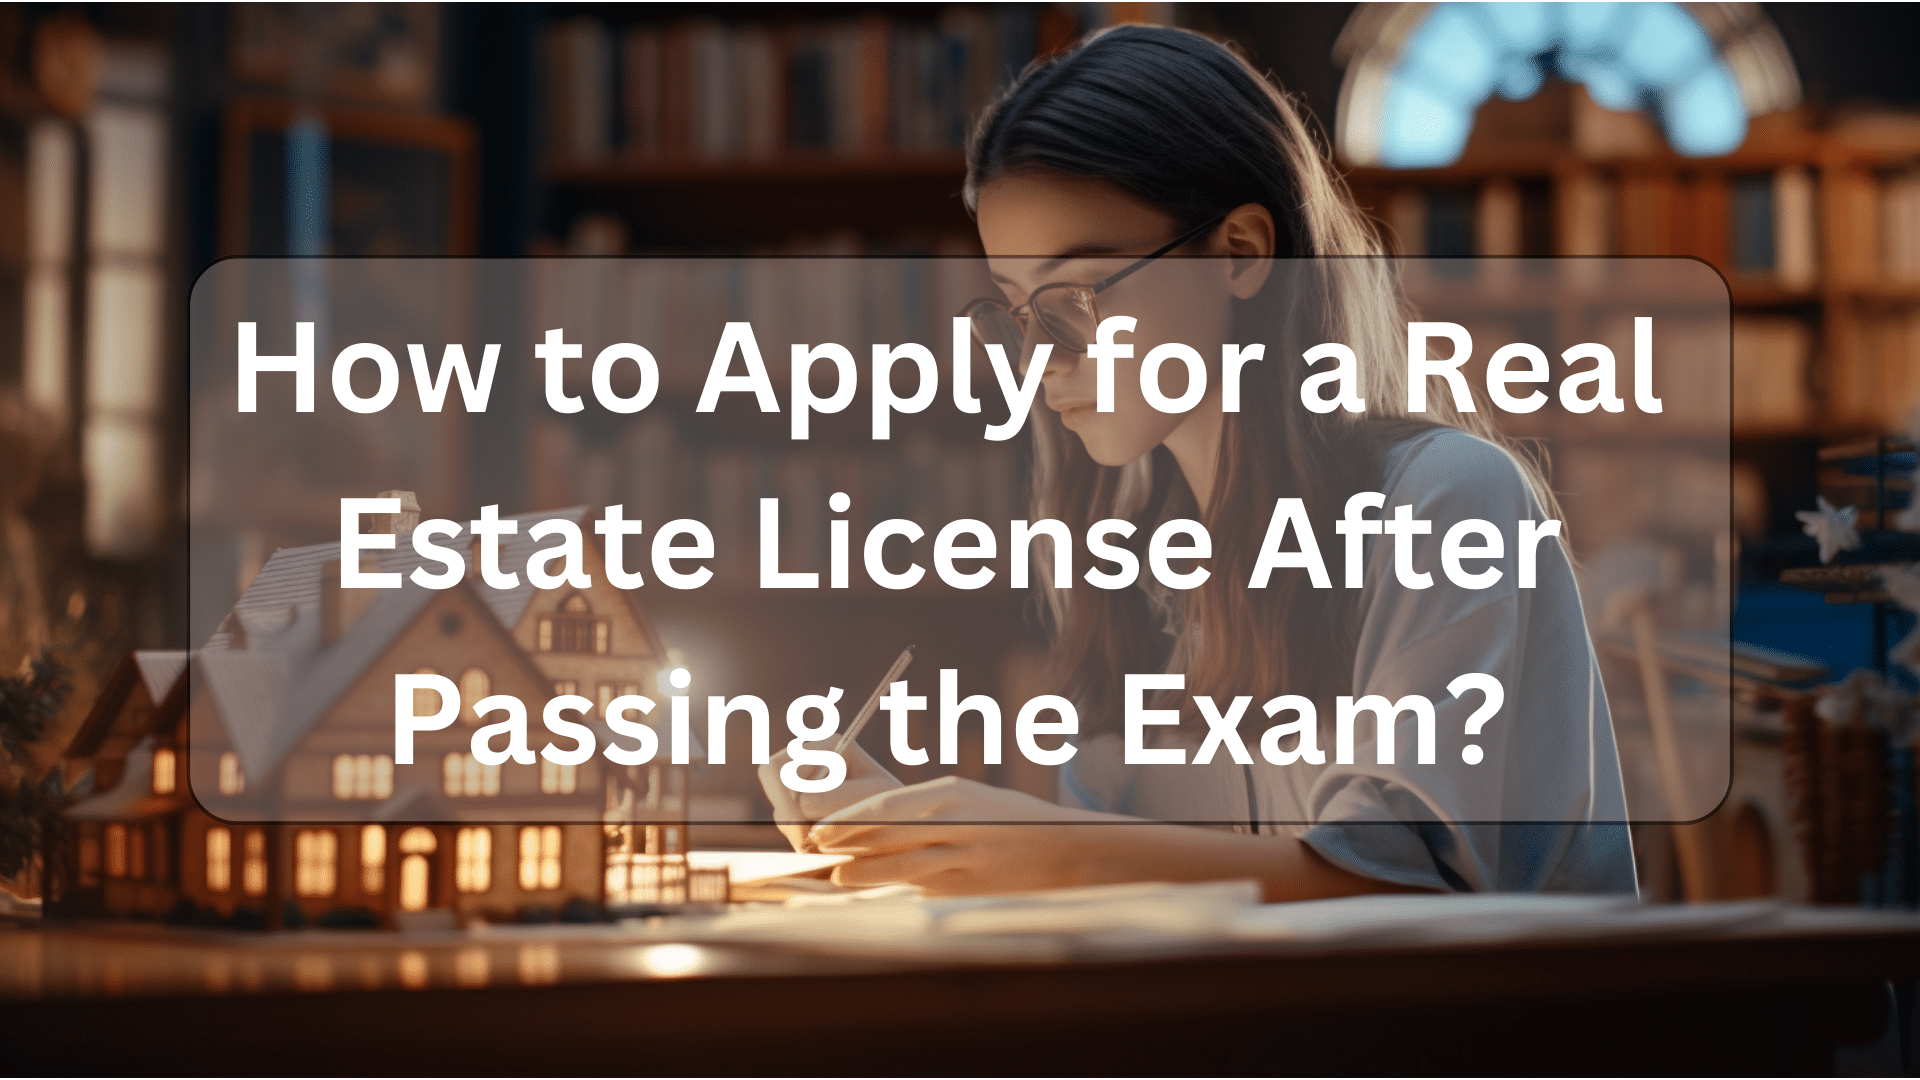 how to apply for a real estate license after passing the exam illustration